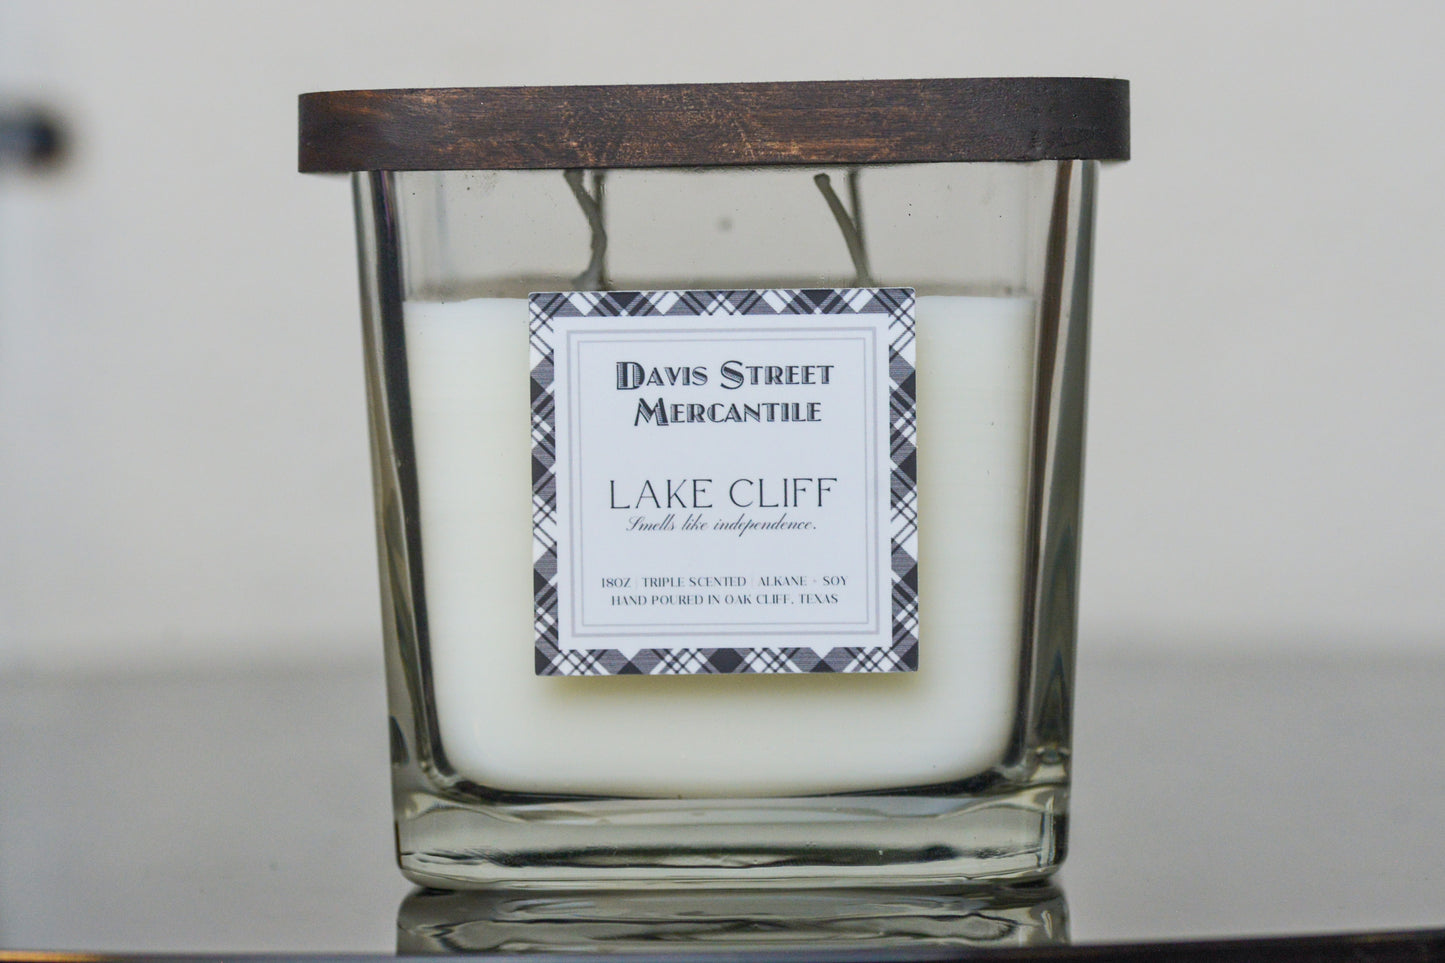 Lake Cliff Candle